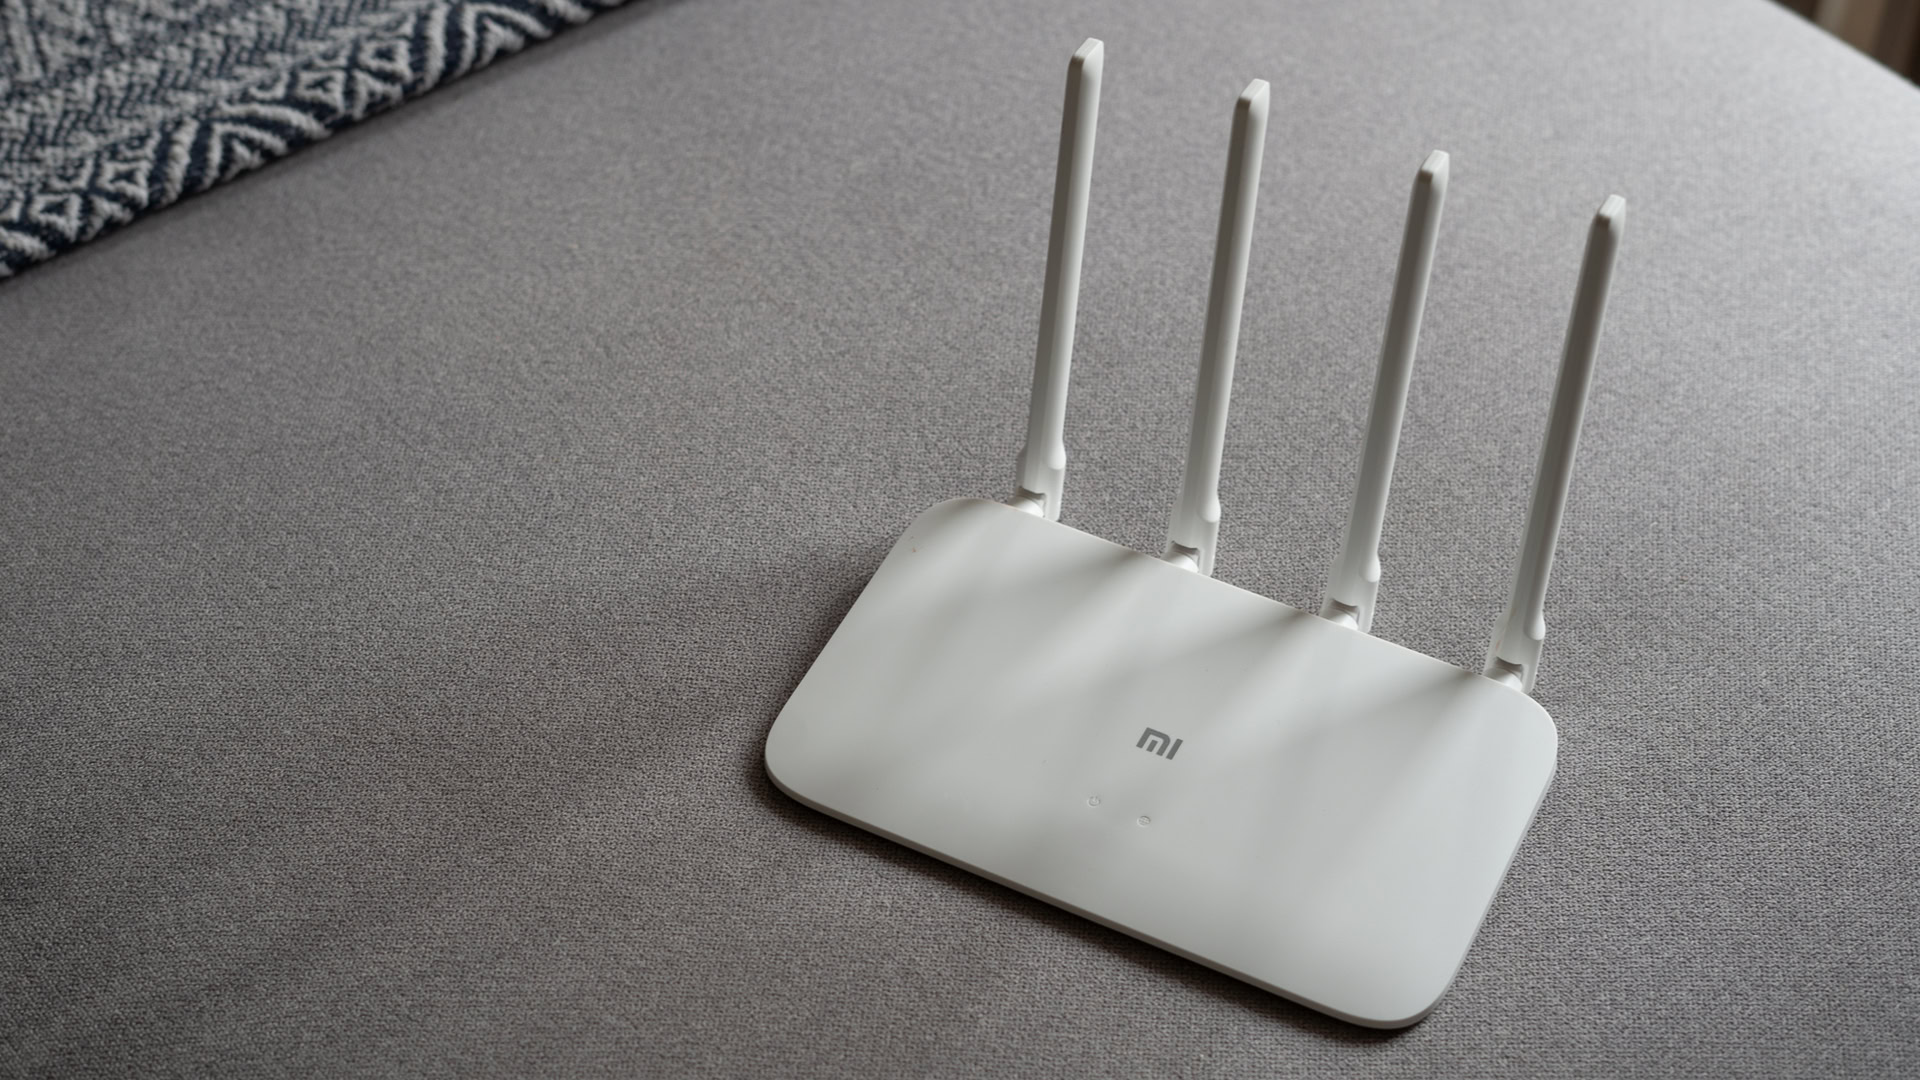 Xiaomi Mi Router 4A Gigabit Edition review: An affordable router done right